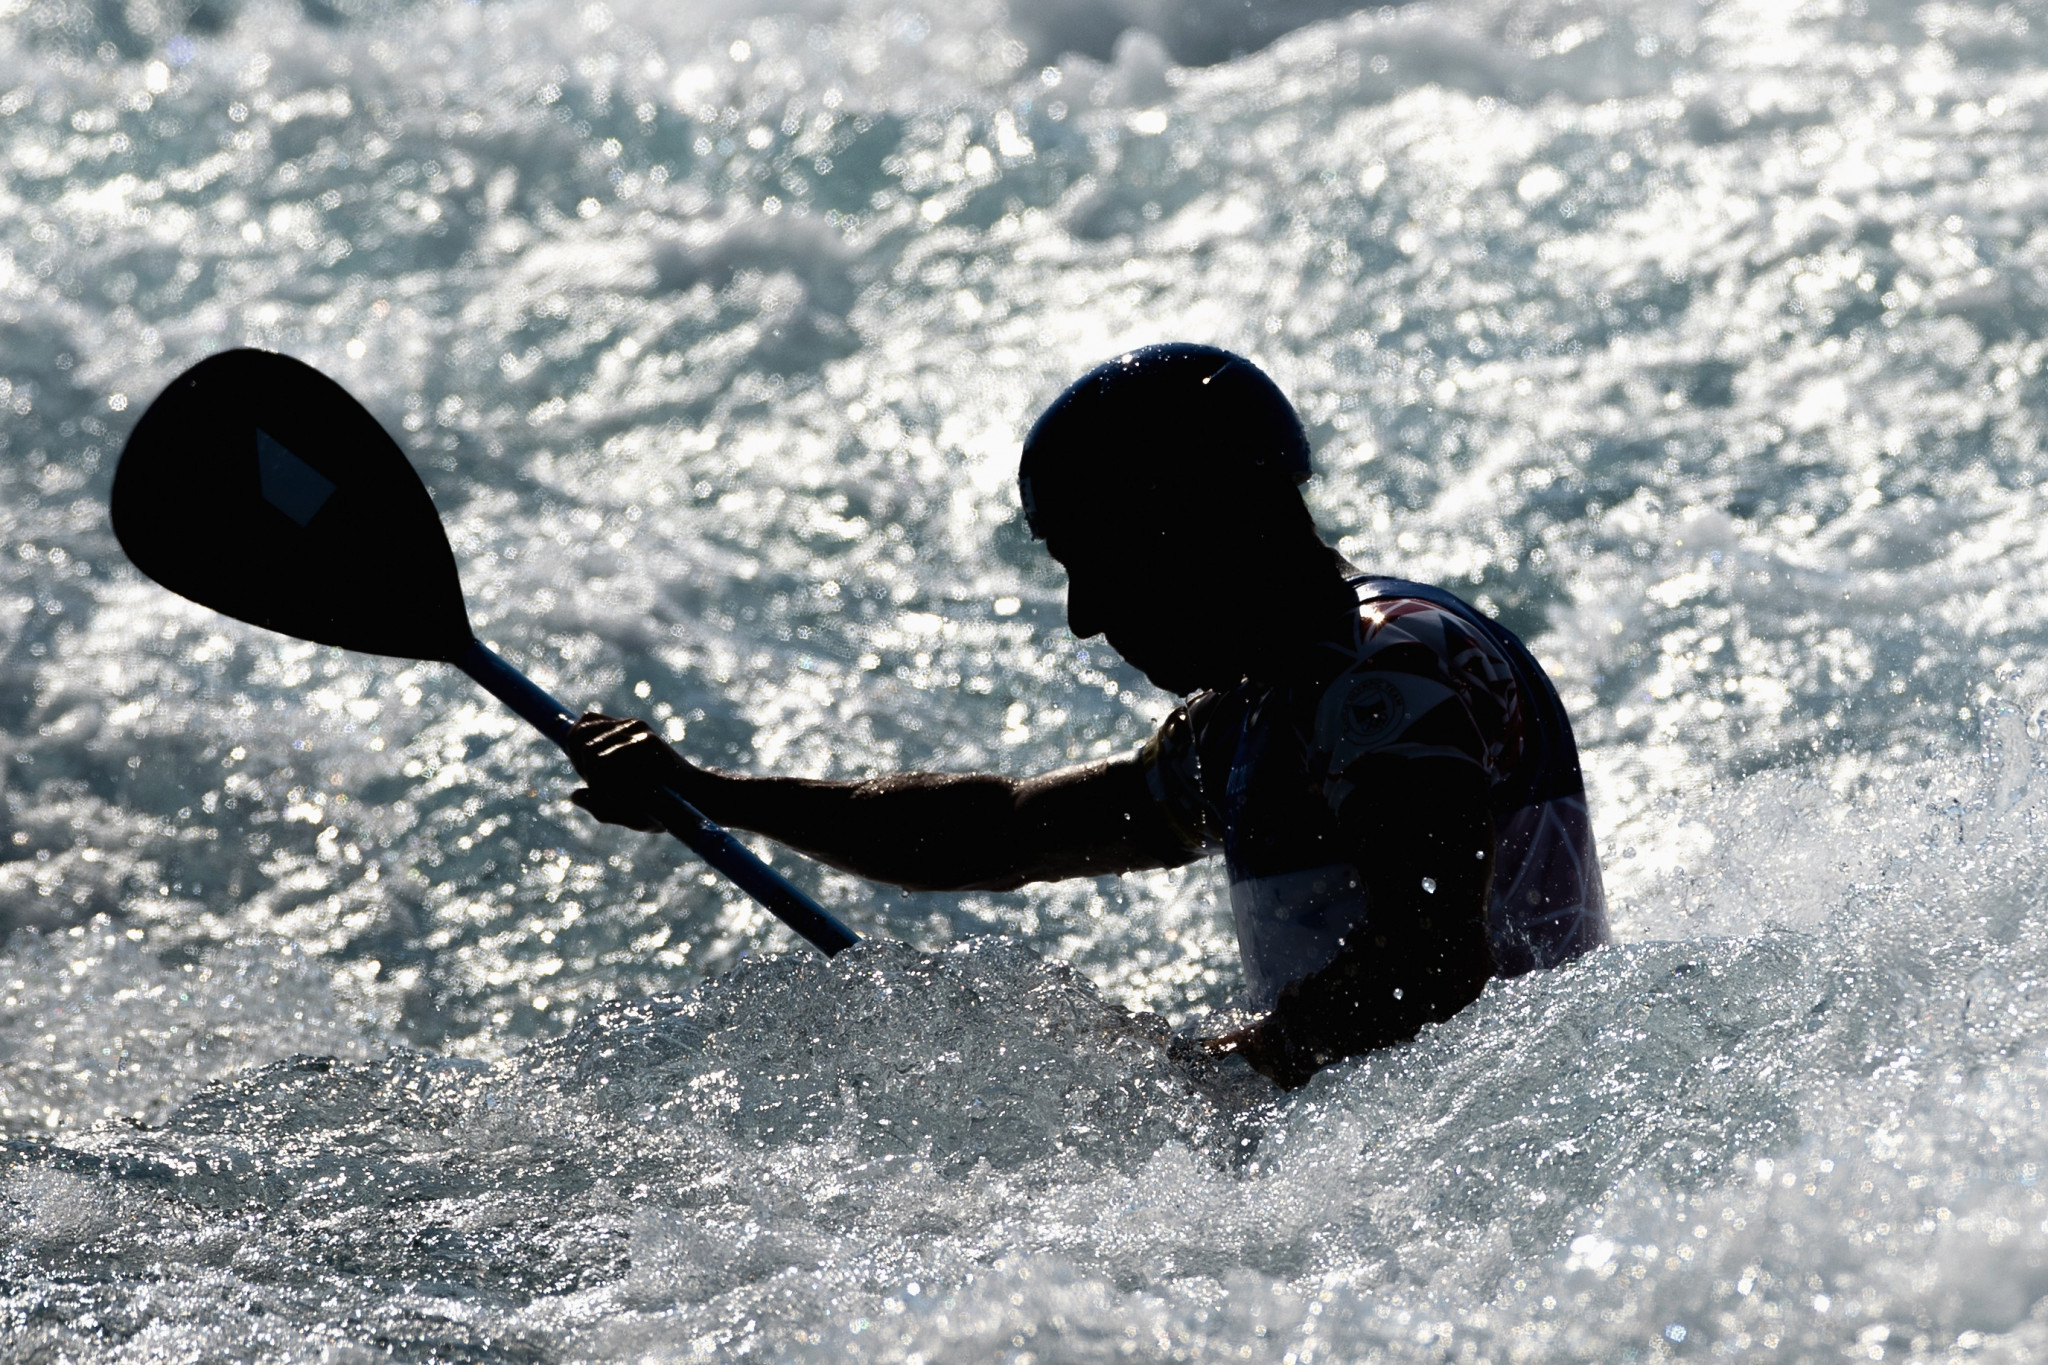 French and Czechs dominate sprint qualifying at Wildwater Canoeing European Championships